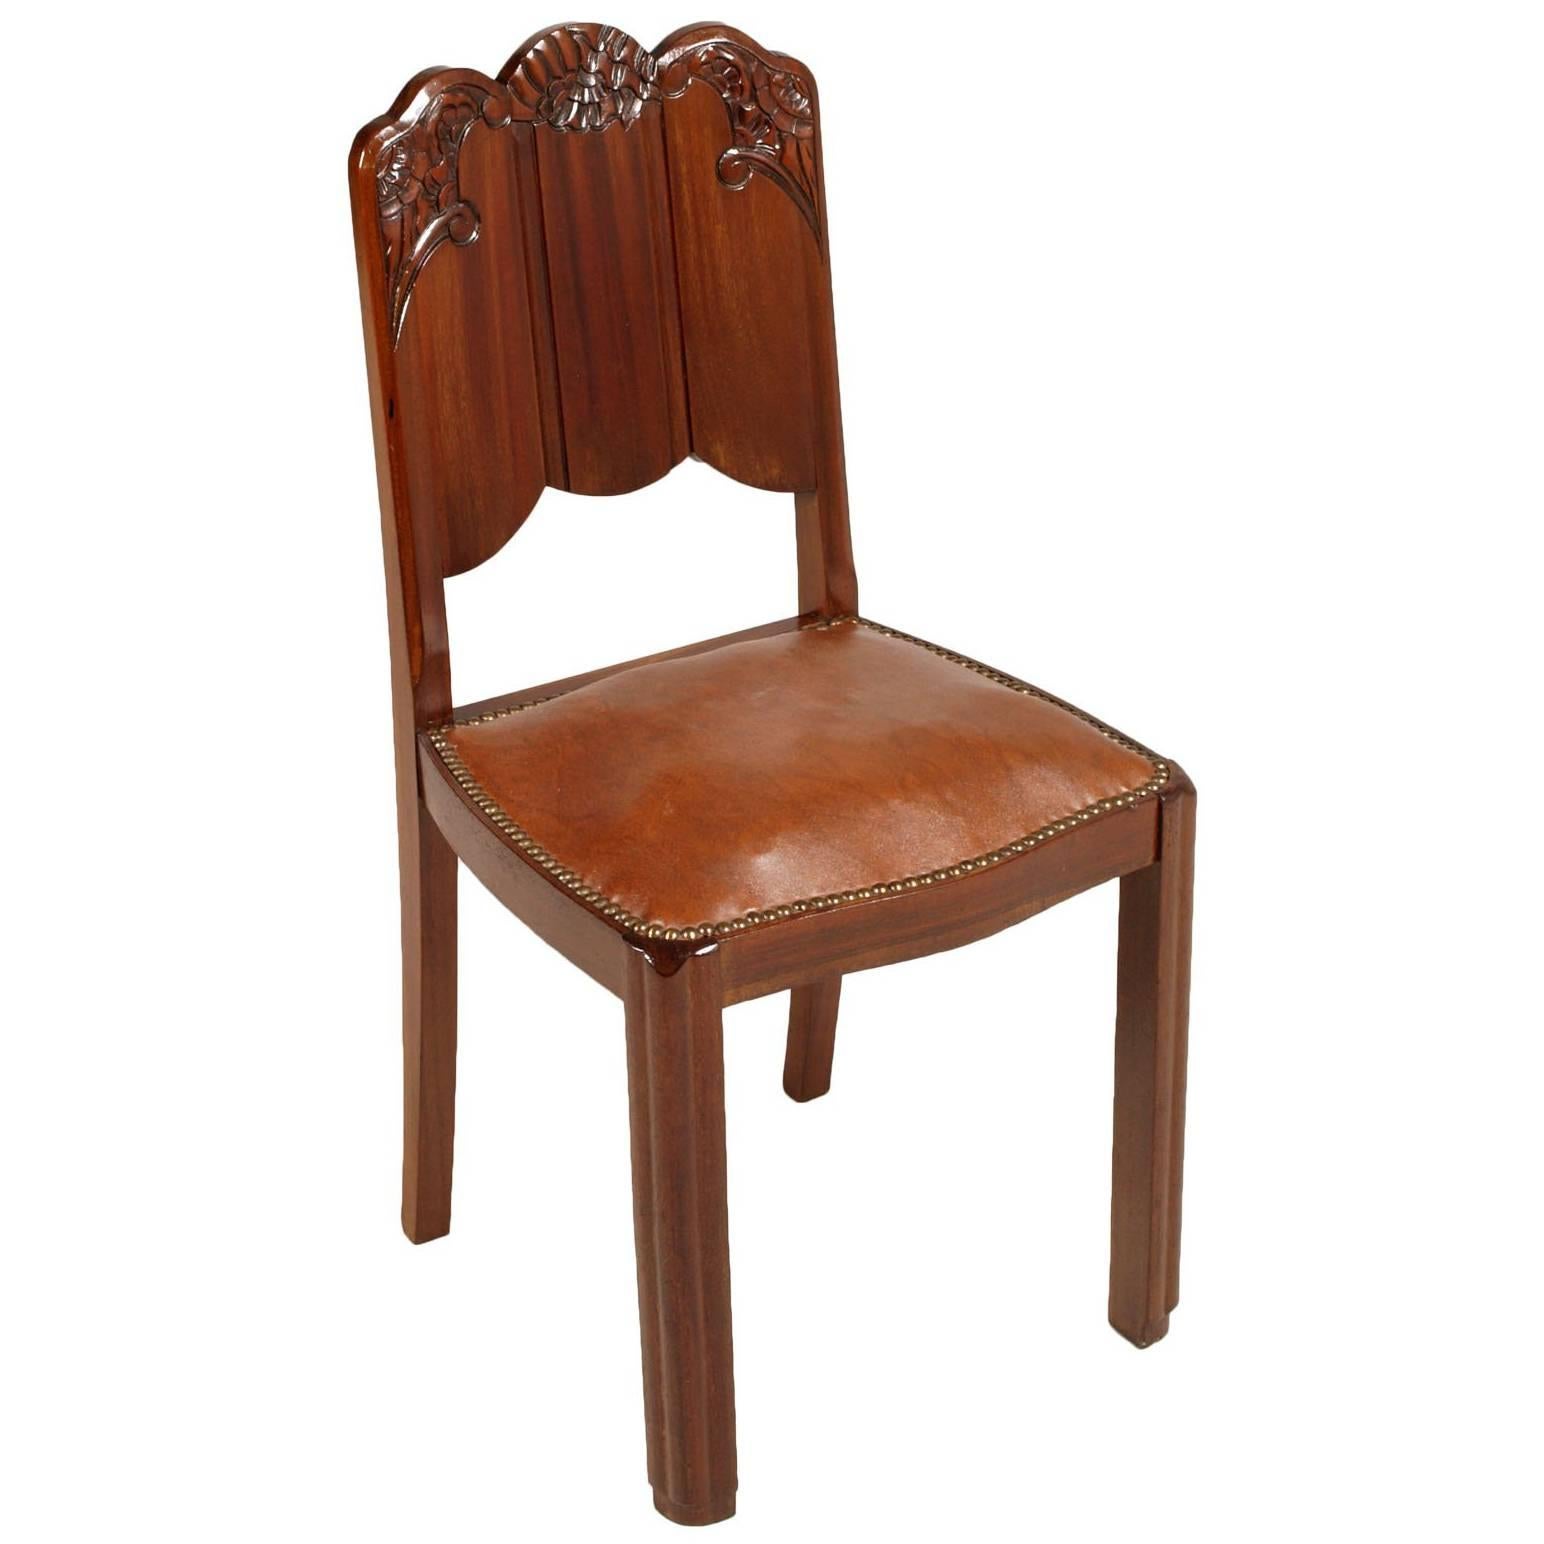 Early 20th Century French Art Nouveau Carved Mahogany Chair, Leatherette Seat For Sale